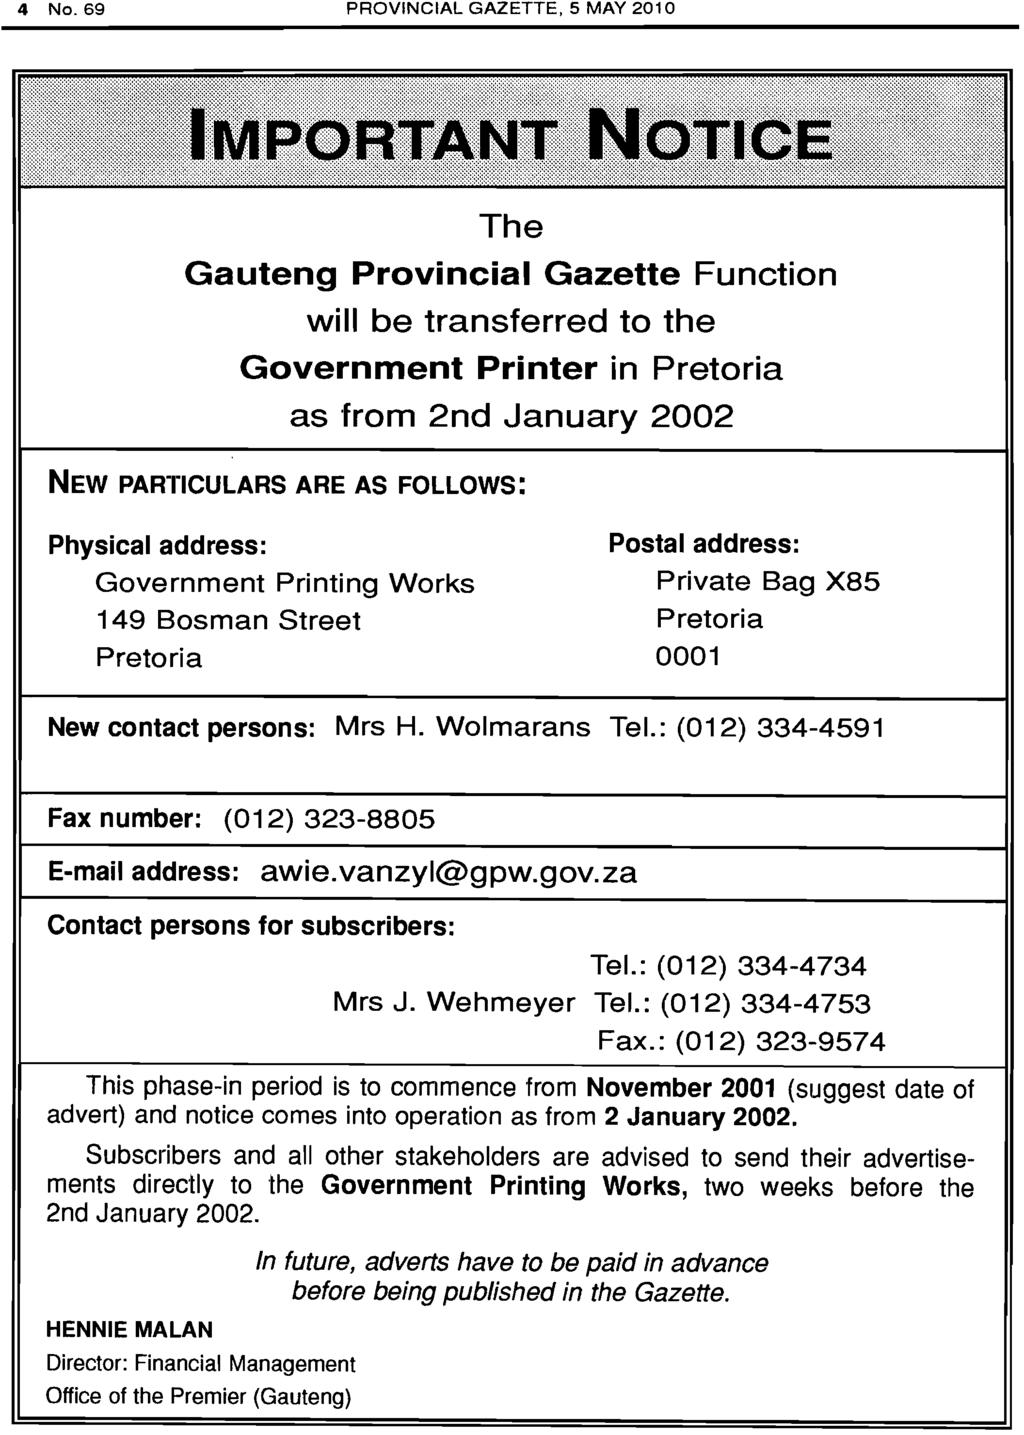 4 No. 69 PROVINCIAL GAZETTE, 5 MAY 2010 The Gauteng Provincial Gazette Function will be transferred to the Government Printer in Pretoria as 'from 2nd January 2002 NEW PARTICULARS ARE AS FOLLOWS: